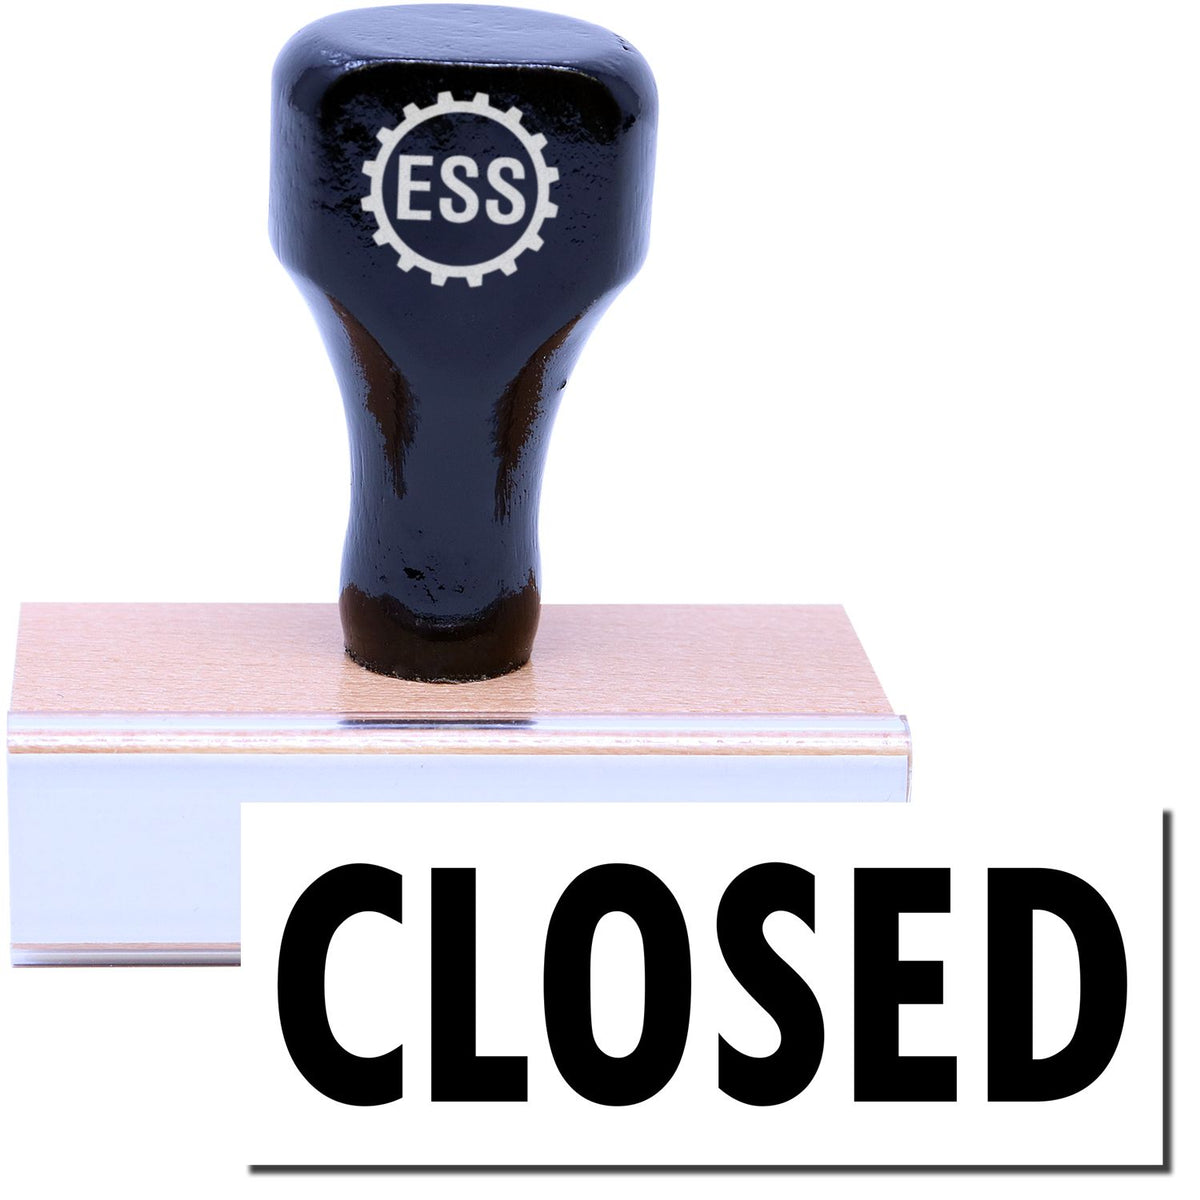 A stock office rubber stamp with a stamped image showing how the text &quot;CLOSED&quot; is displayed after stamping.